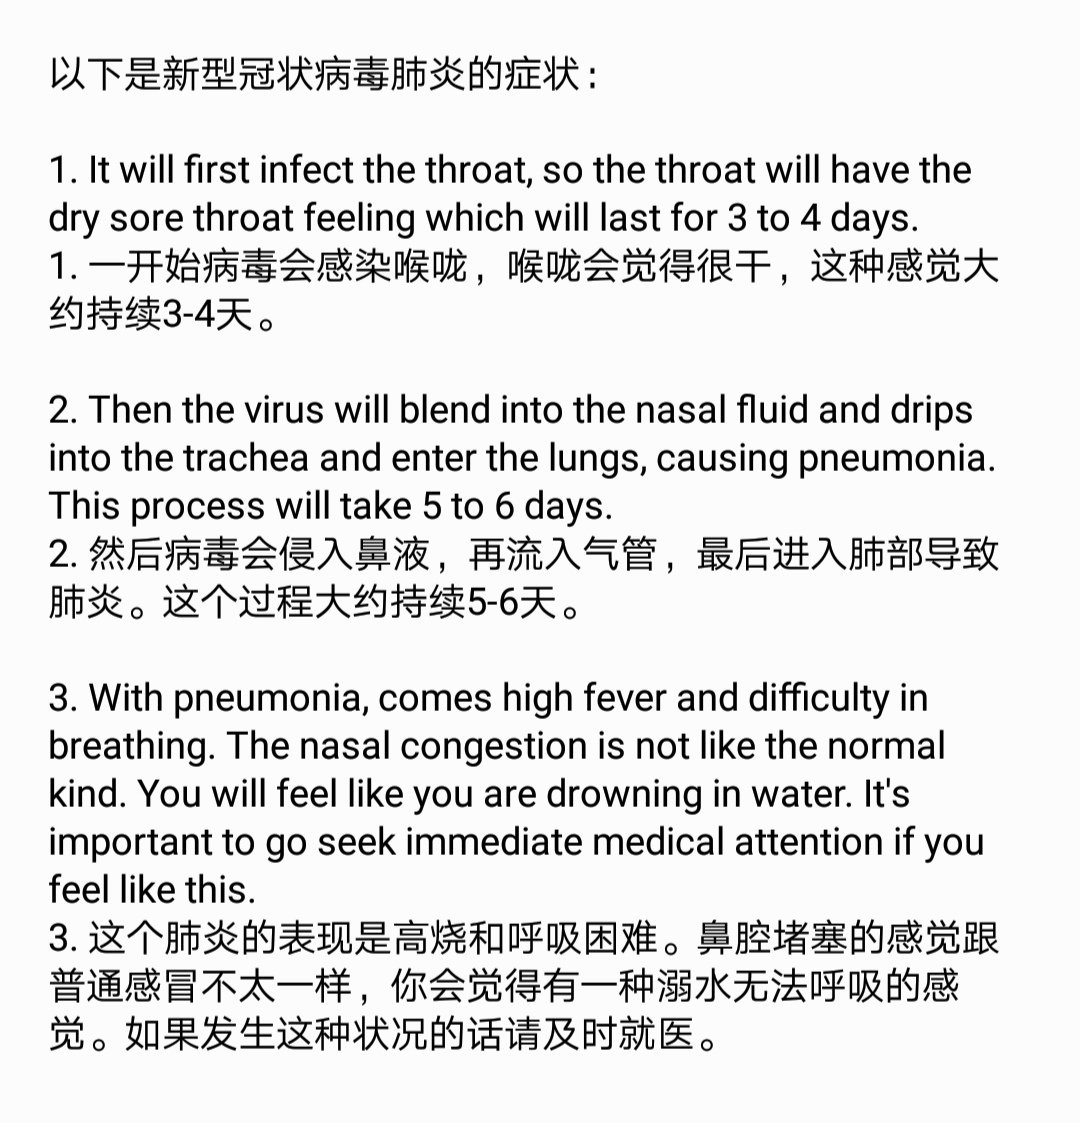 It's worth repeating the course of infection:Day 1-4: Infects the throat. If symptomatic, you'll have sore throat, dry cough.Day 4-10: It moves down the trachea and into lungs. Onset of pneumonia.It is at this point that the body begin to fight it off, or condition worsens.